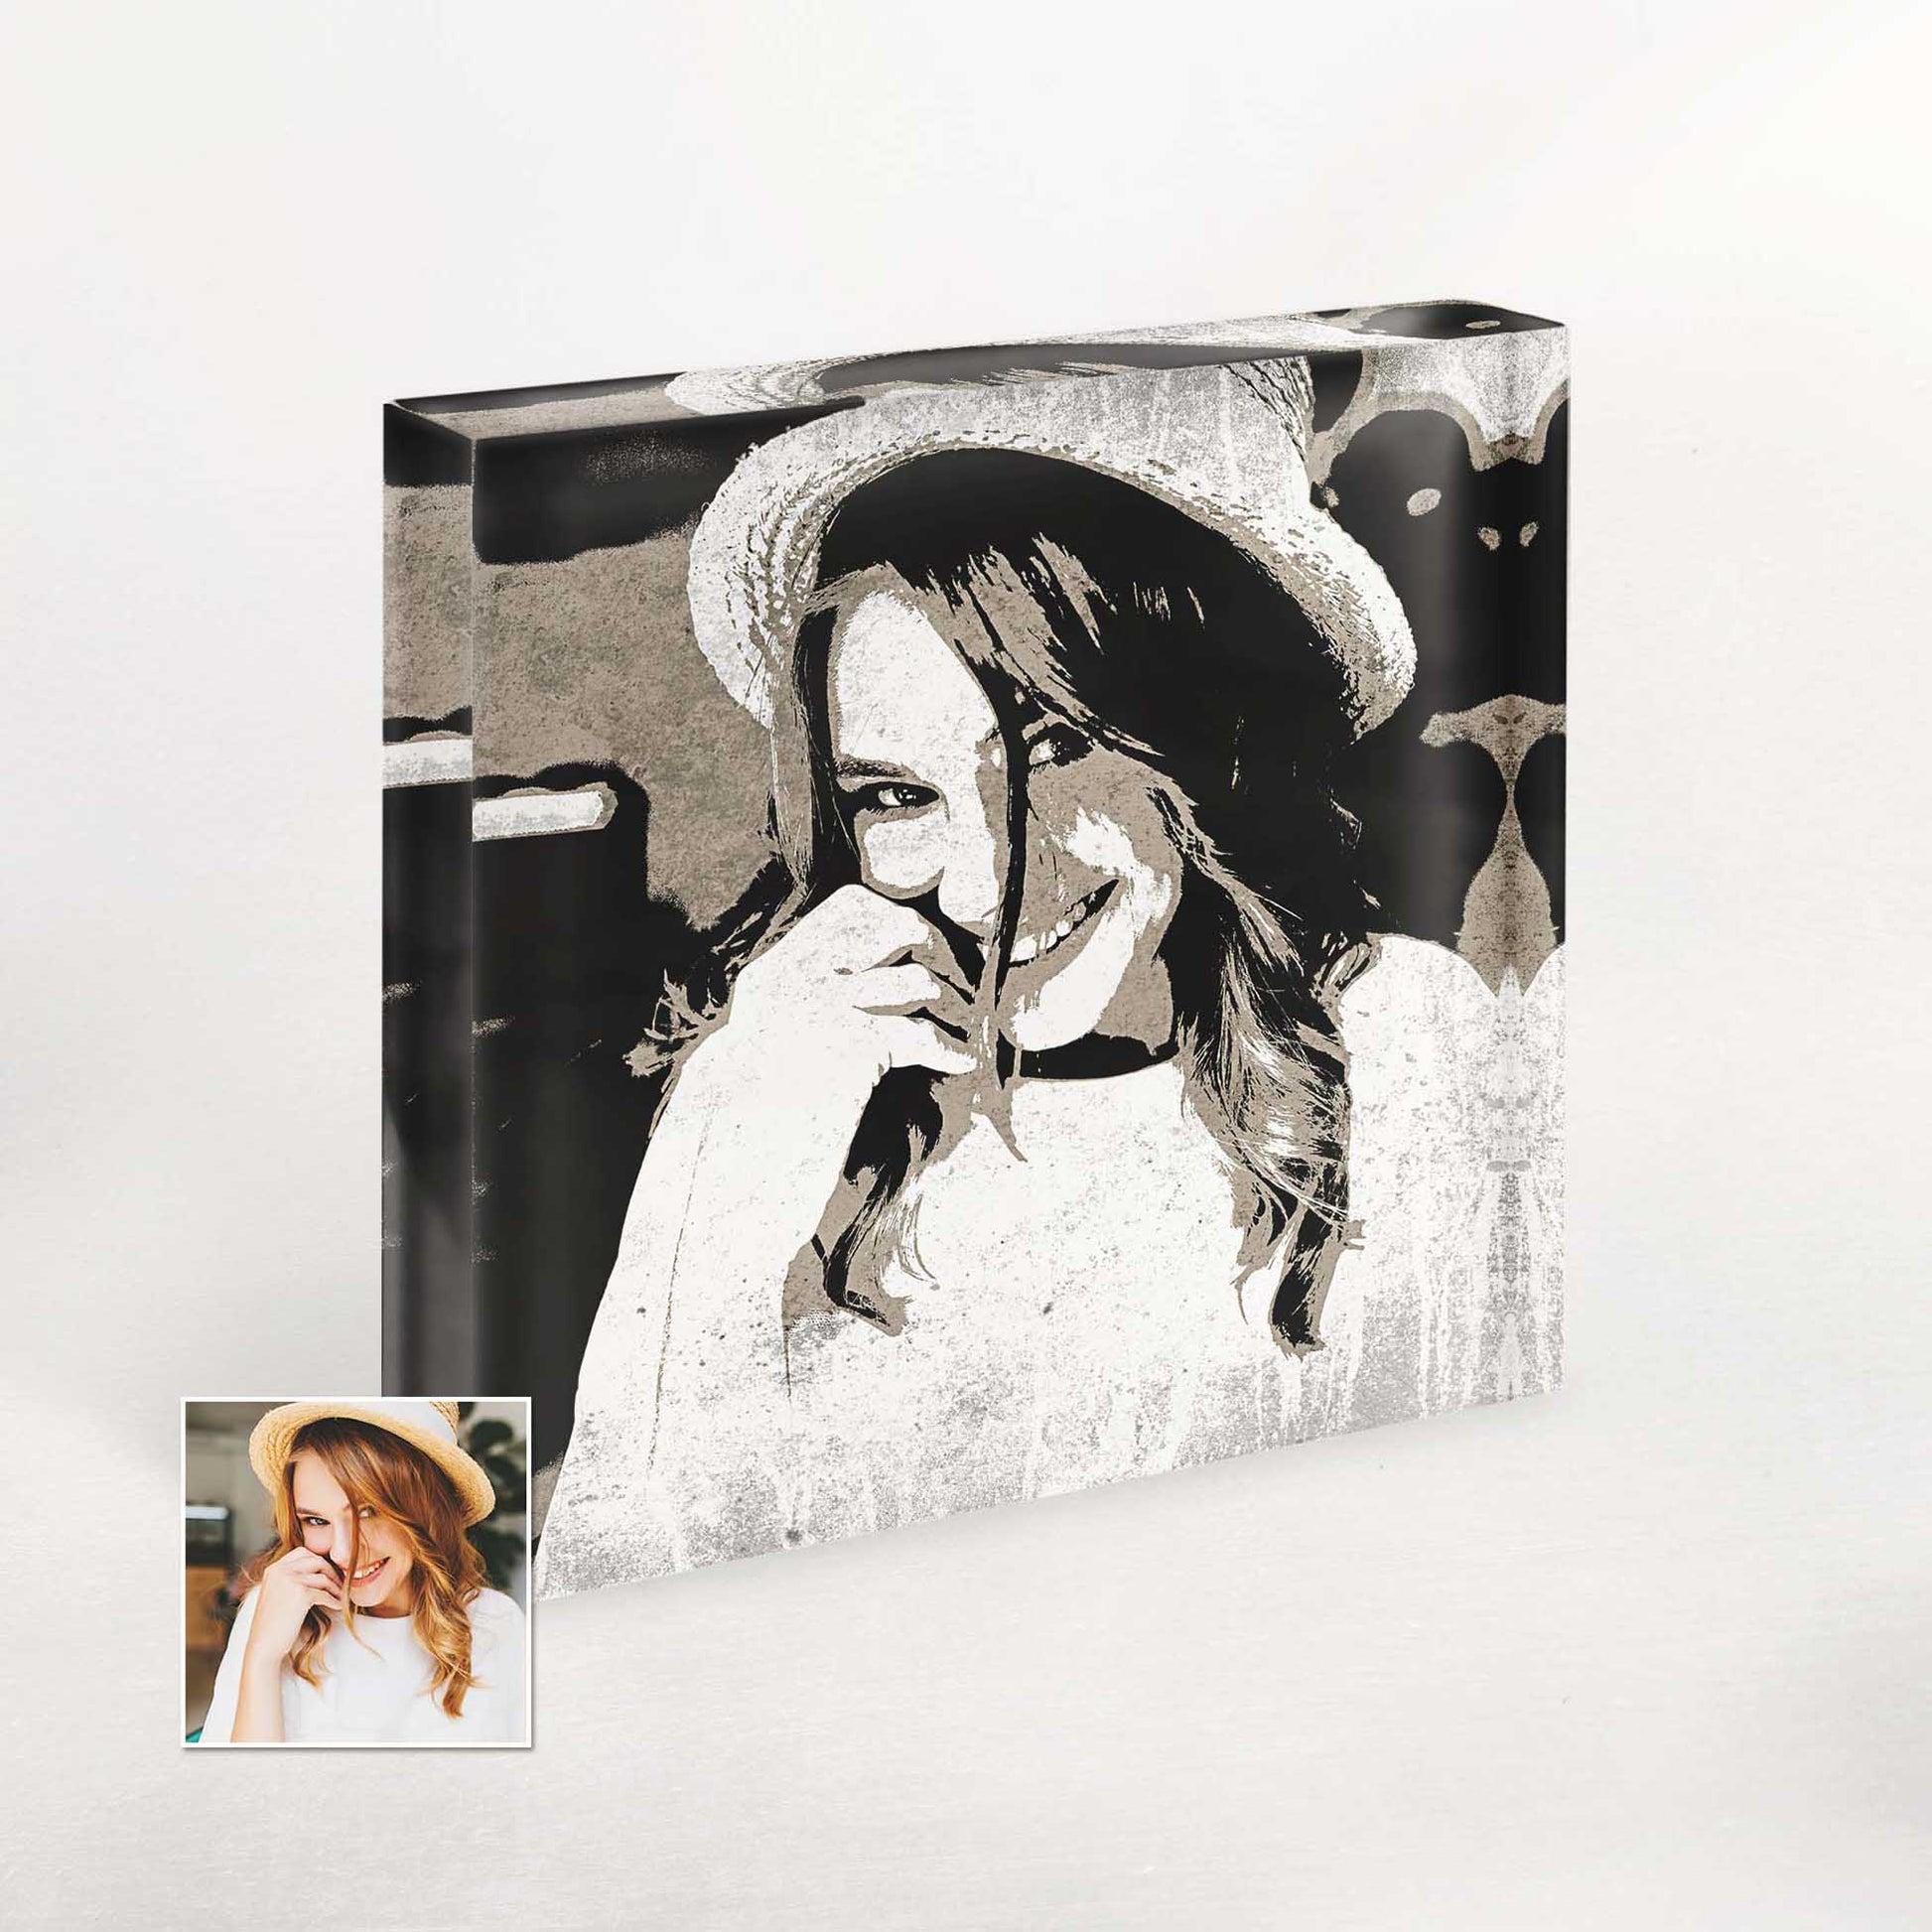 Novelty Gift for Special Occasions: Personalised Black and White Street Art Acrylic Block Photo. Surprise your loved ones with an elegant and cool statement piece. Our street art acrylic block photos 